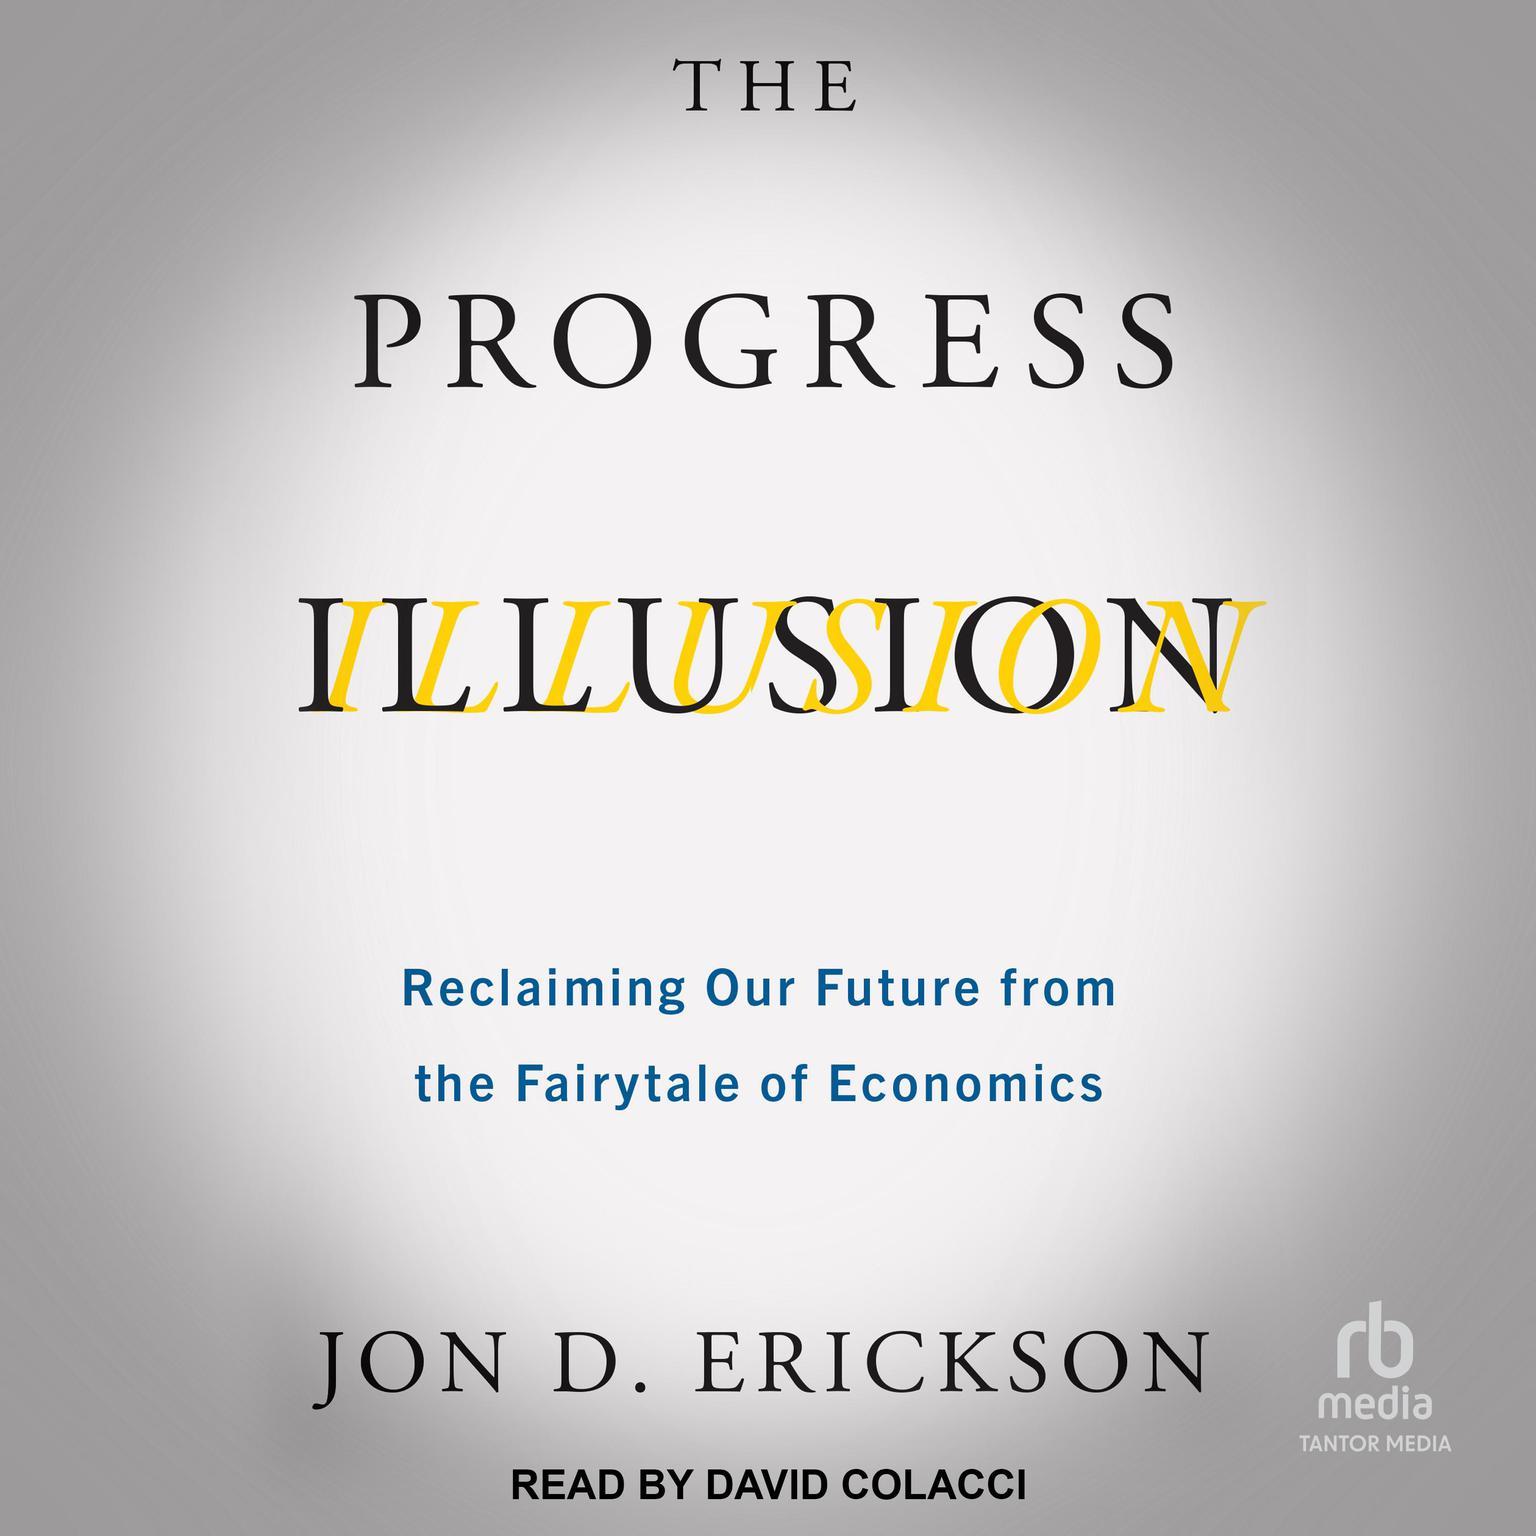 The Progress Illusion: Reclaiming Our Future from the Fairytale of Economics Audiobook, by Jon D. Erickson